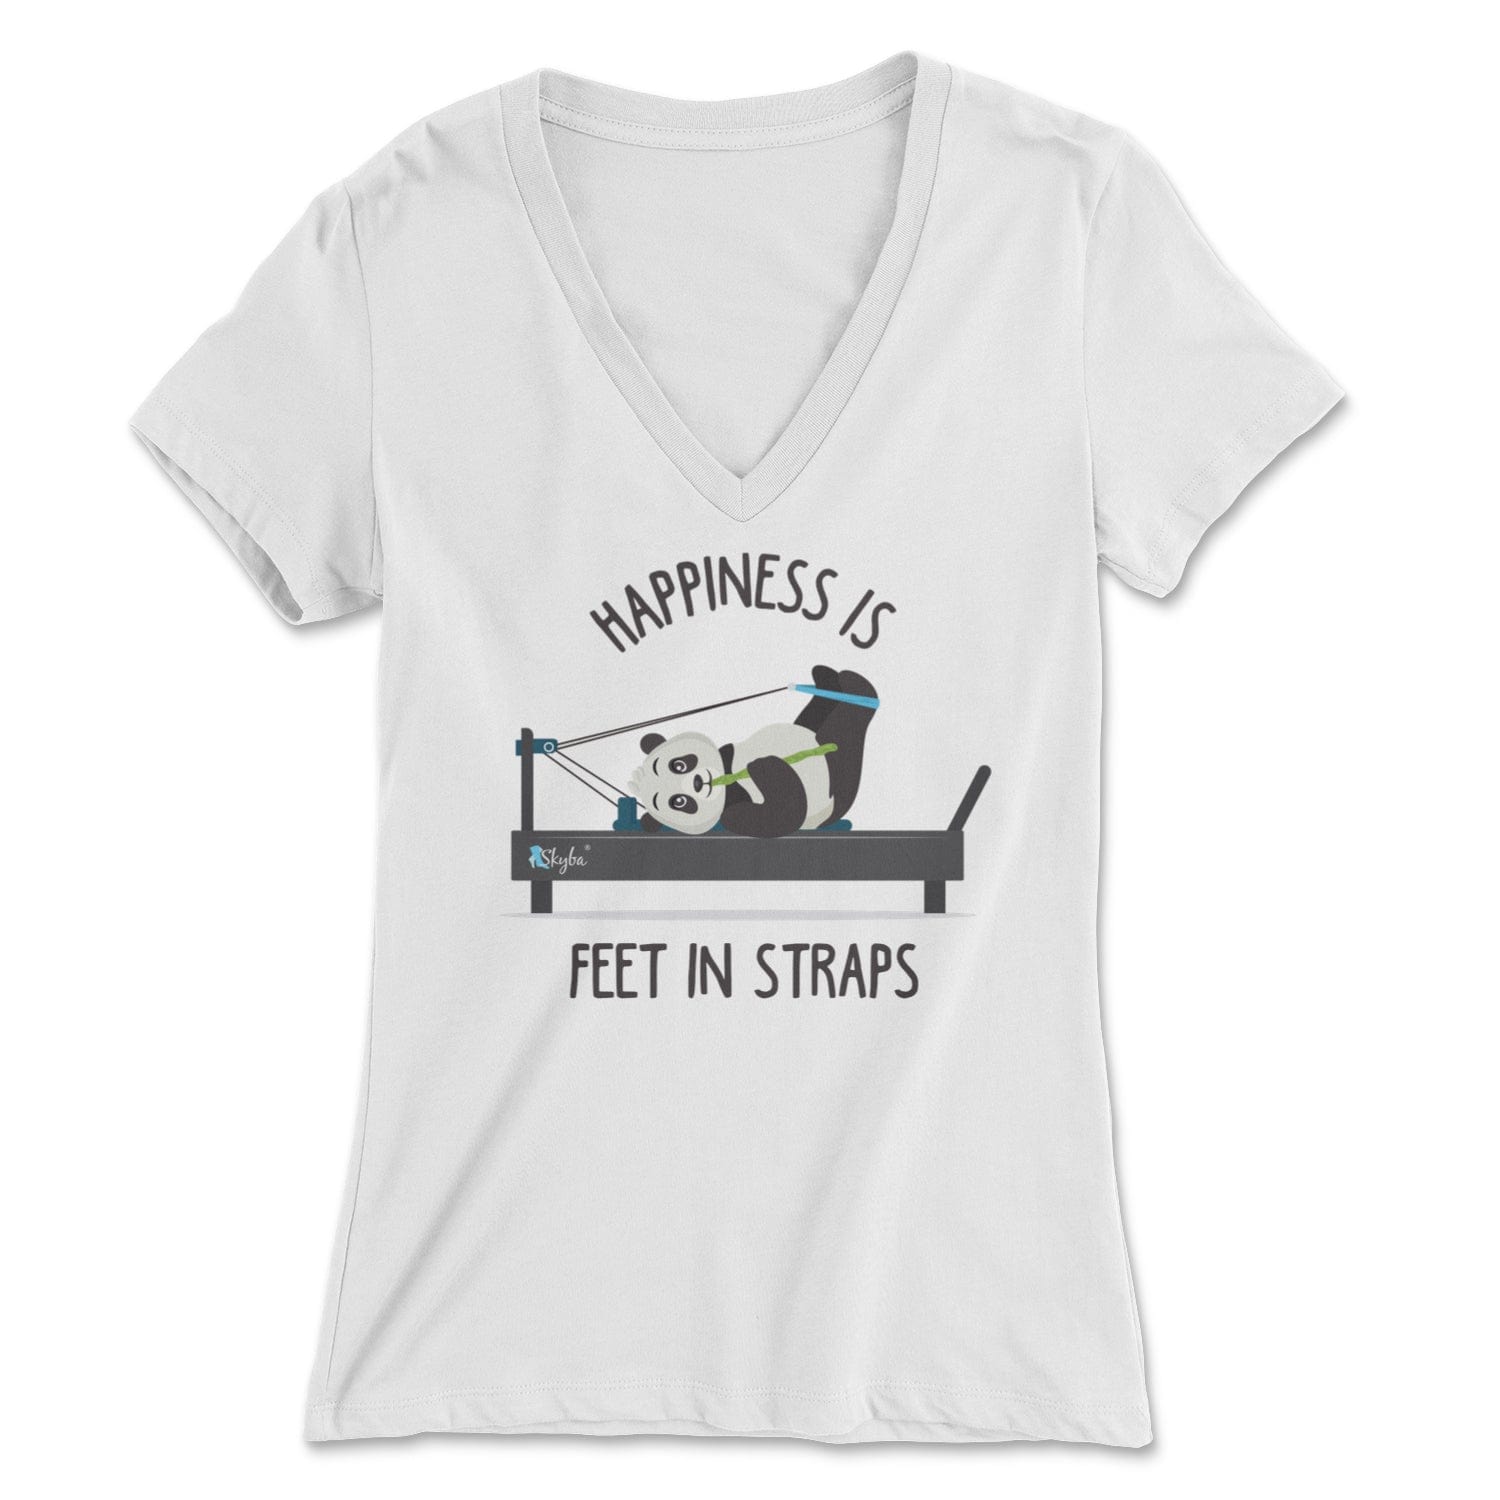 "Happiness is Feet in Straps" Panda on the Reformer - Women's V-Neck Tee Skyba Print Material